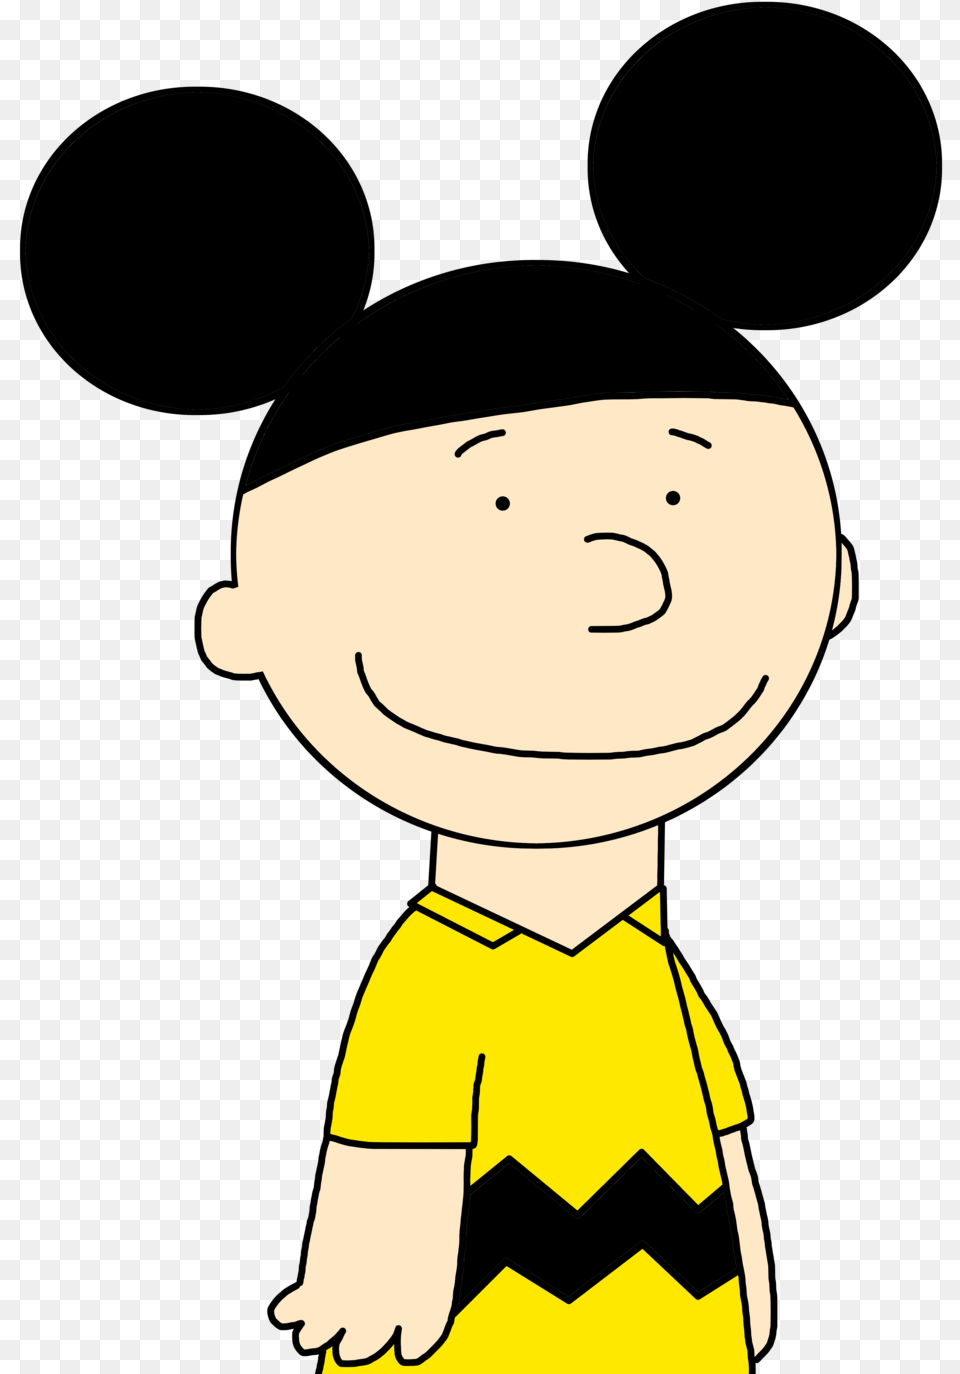 Charlie Brown With Mickey Mouse Ears By Marcospower1996 Mickey Mouse Charlie Brown, Cartoon, Baby, Person, Face Free Png Download